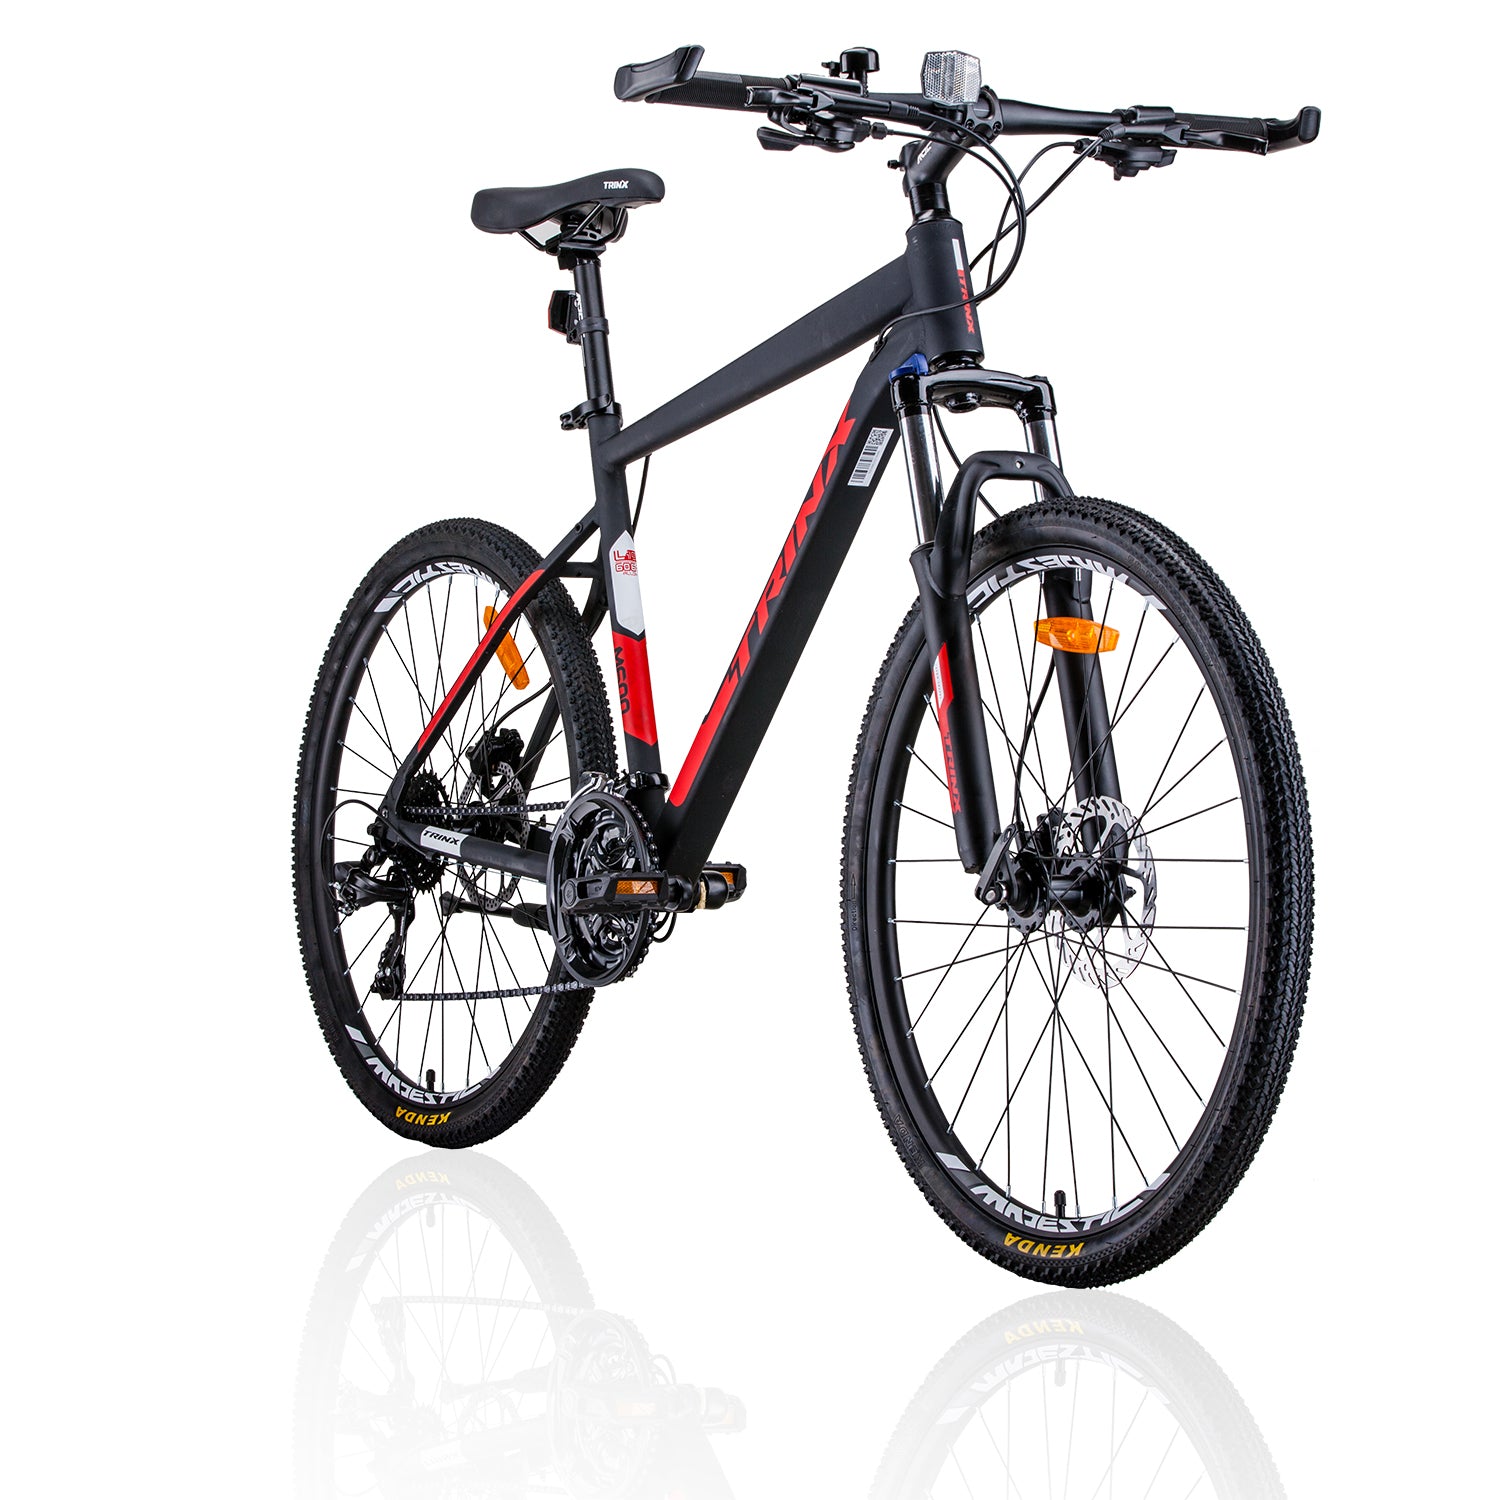 Trinx M600 Mountain Bike 24 Speed MTB Bicycle 19 Inches Frame Red